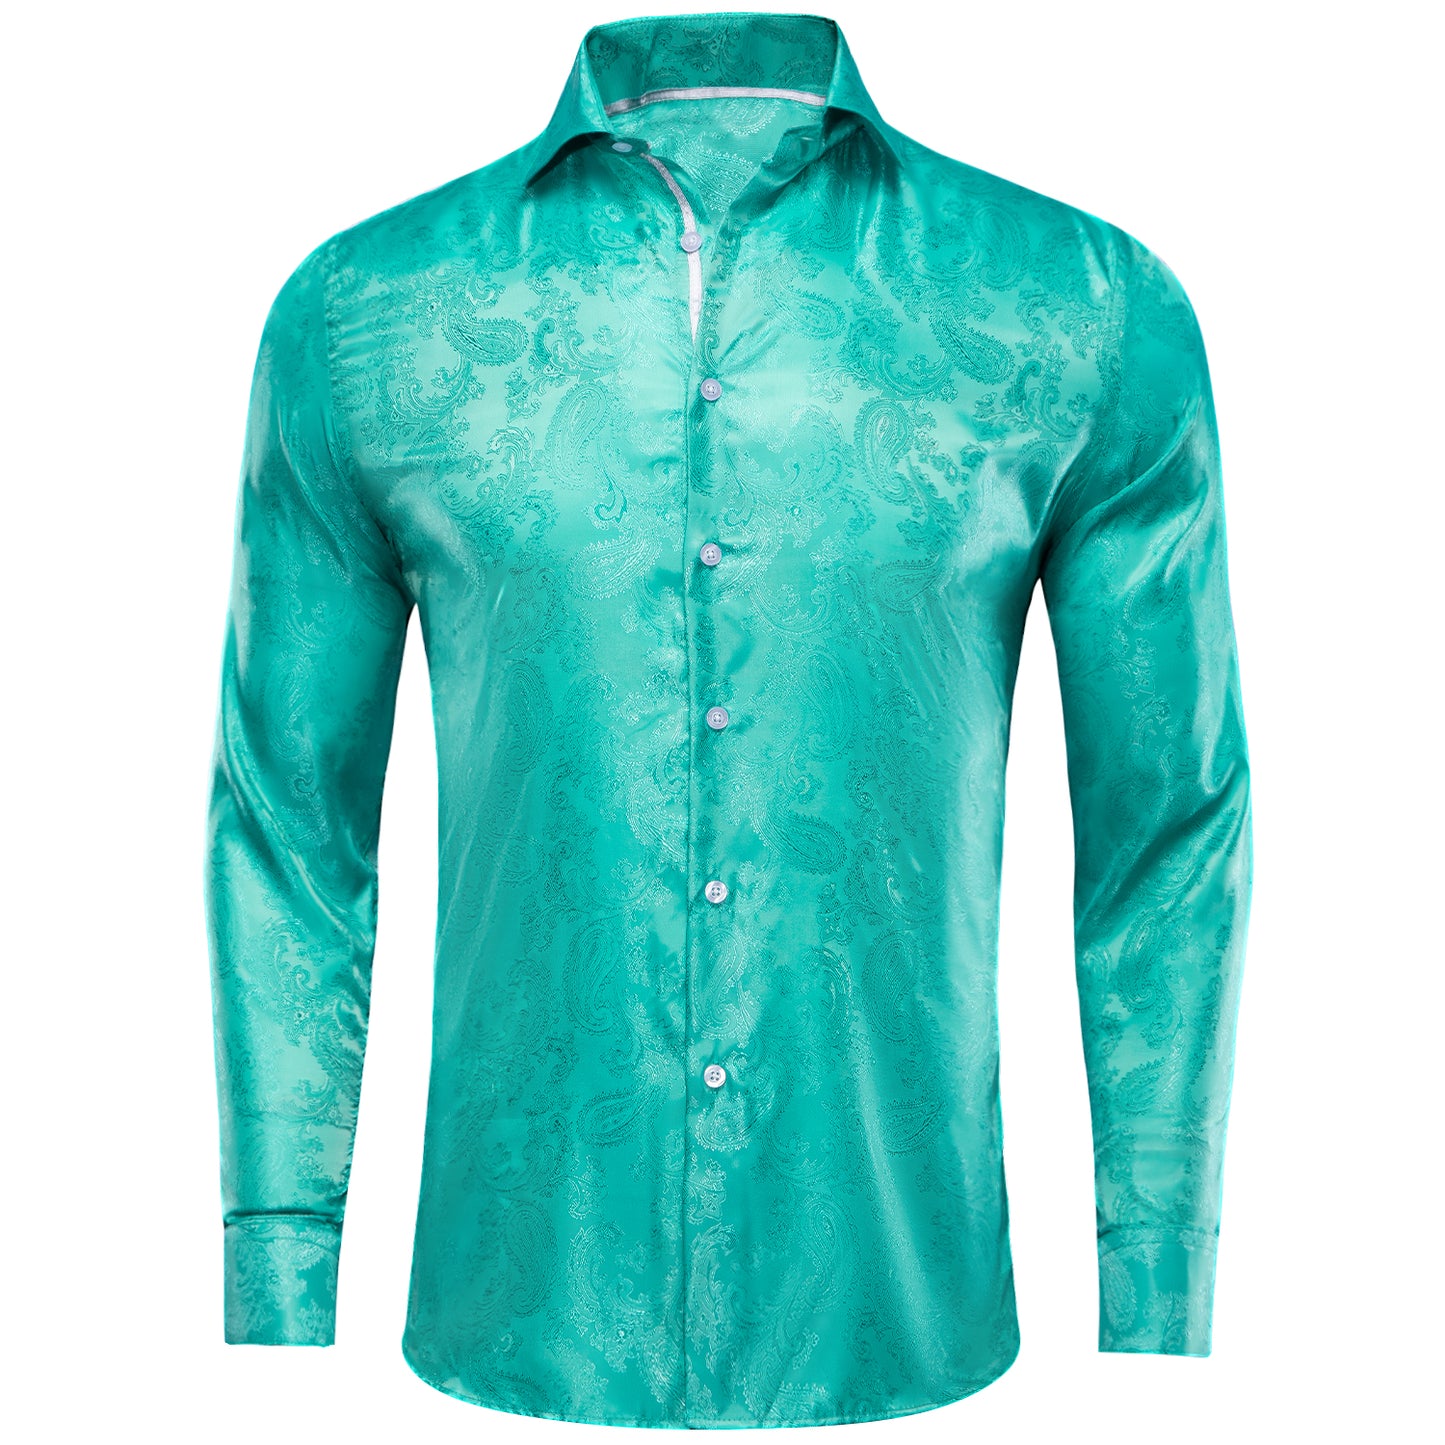 Novelty Silky Shirt - Seagreen Nuts